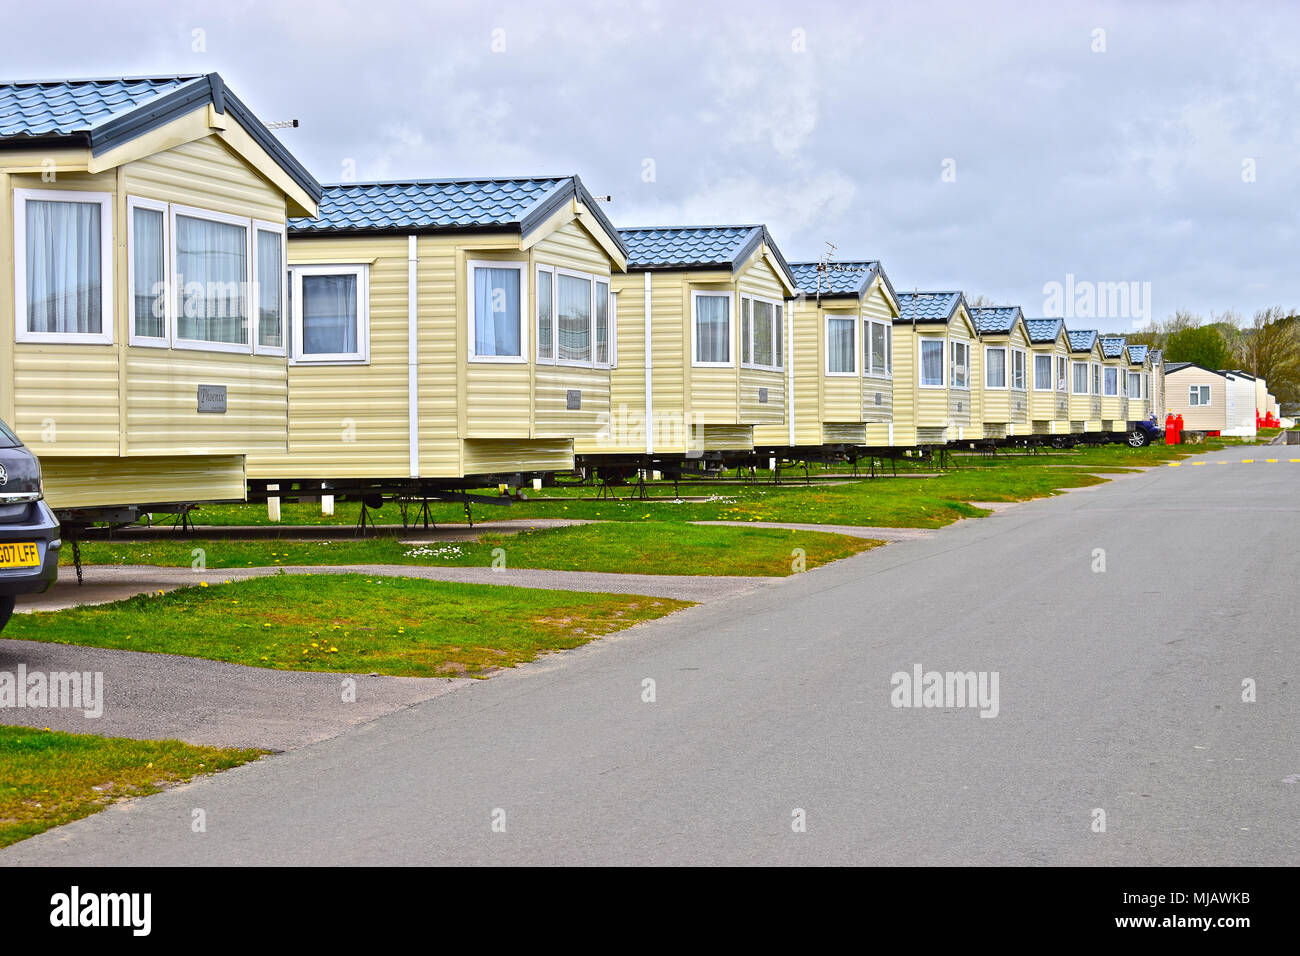 A line of modern static holiday caravans at Trecco Bay Holiday Park, Porthcawl ,S.Wales. This well-kept & run park is now owned by Parkdean Resorts. Stock Photo